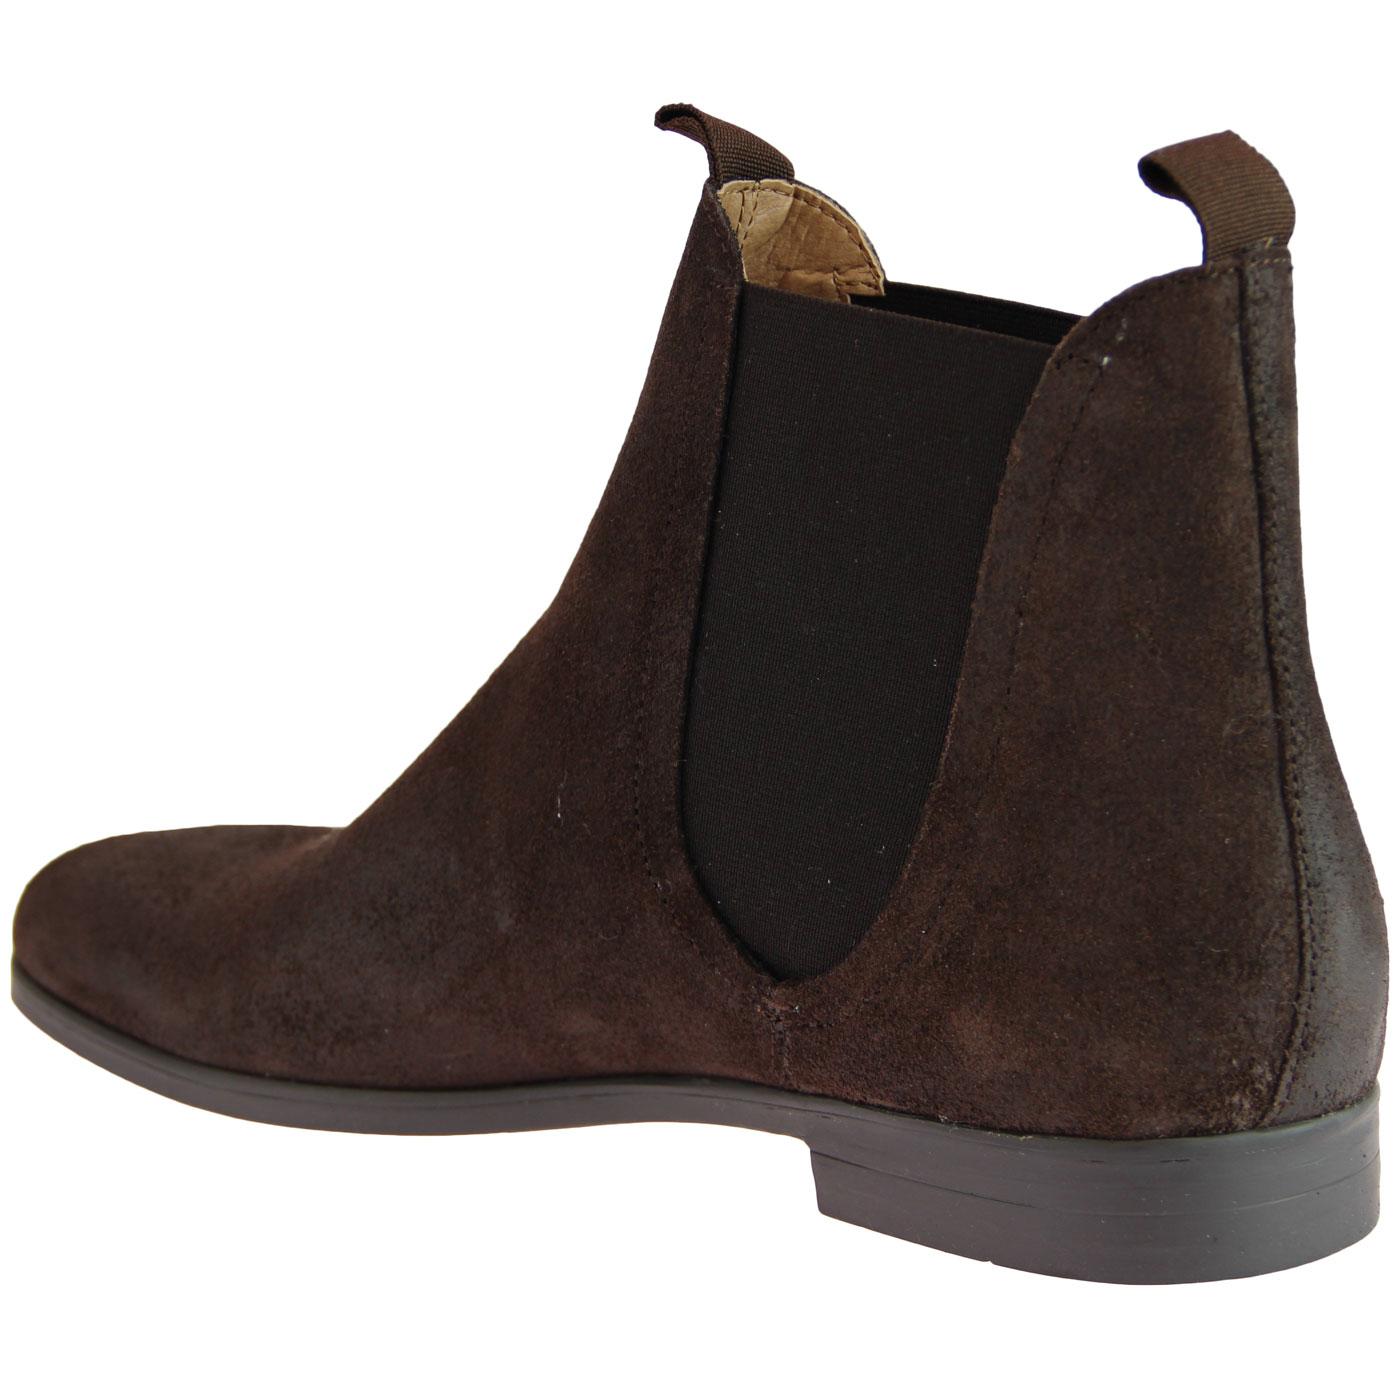 Hudson Atherstone Retro Mod Suede Chelsea Boots In Brown 6922